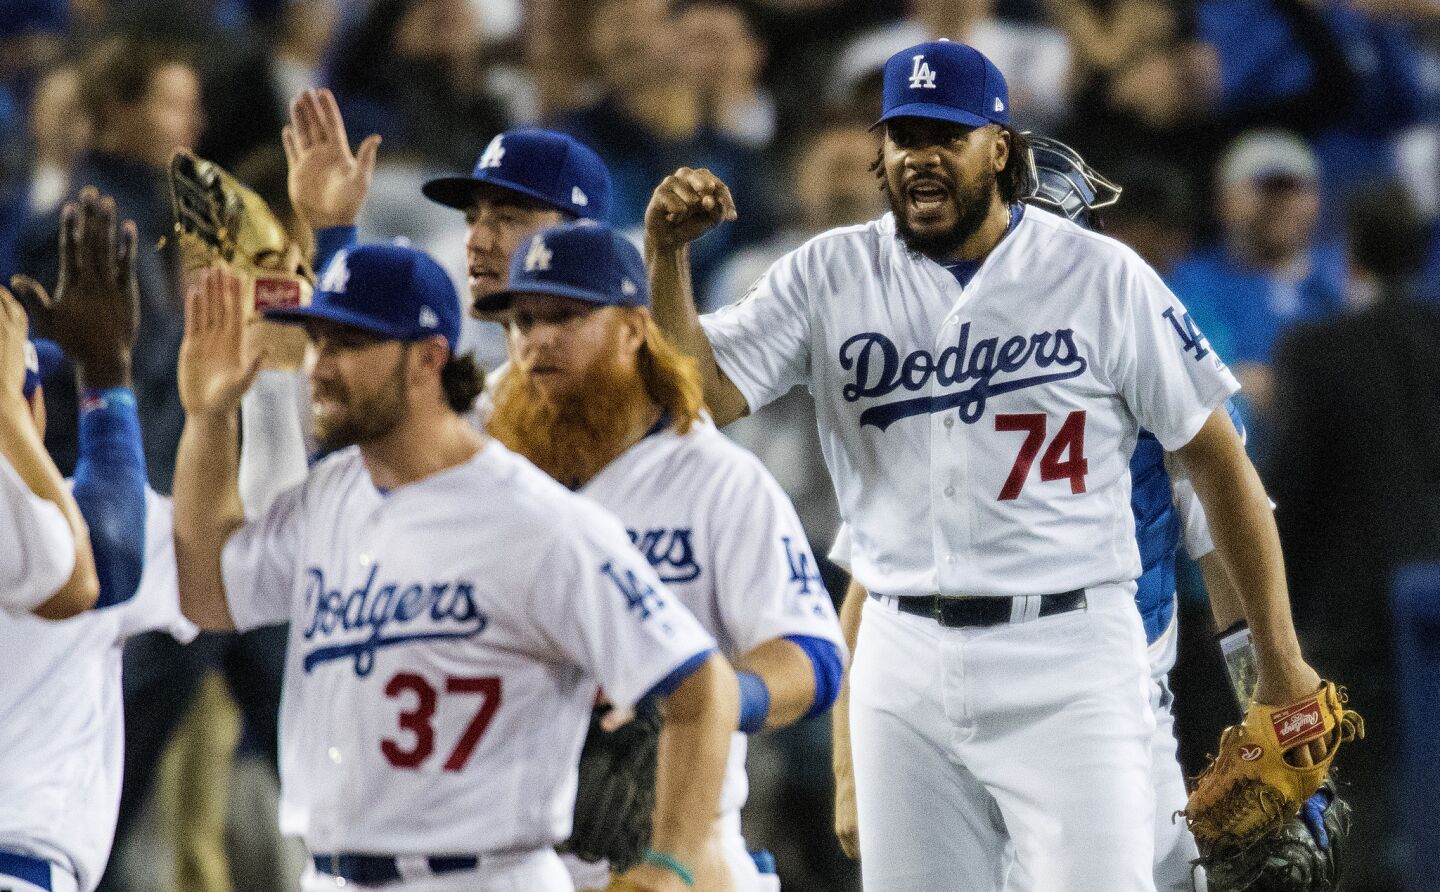 Kenley Jansen reacts with his teammates after winning game 6.